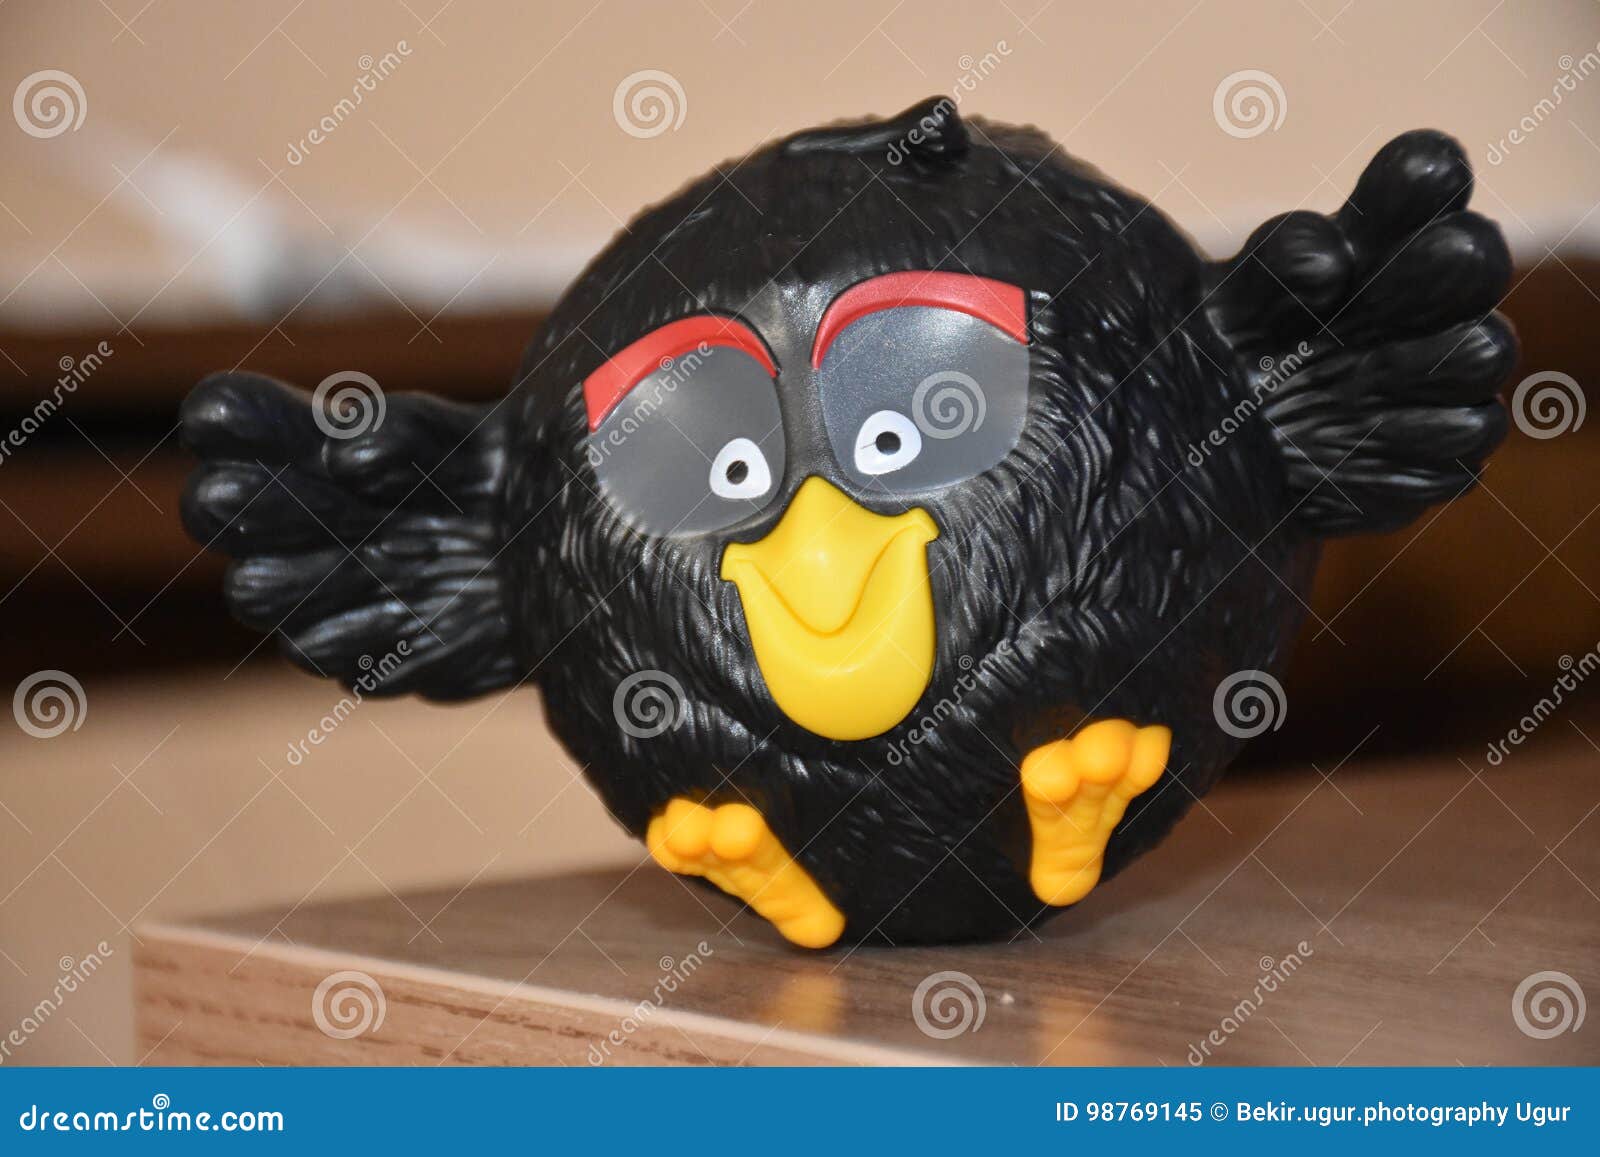 Angry birds black toy editorial image. Image of adorable - 98769145